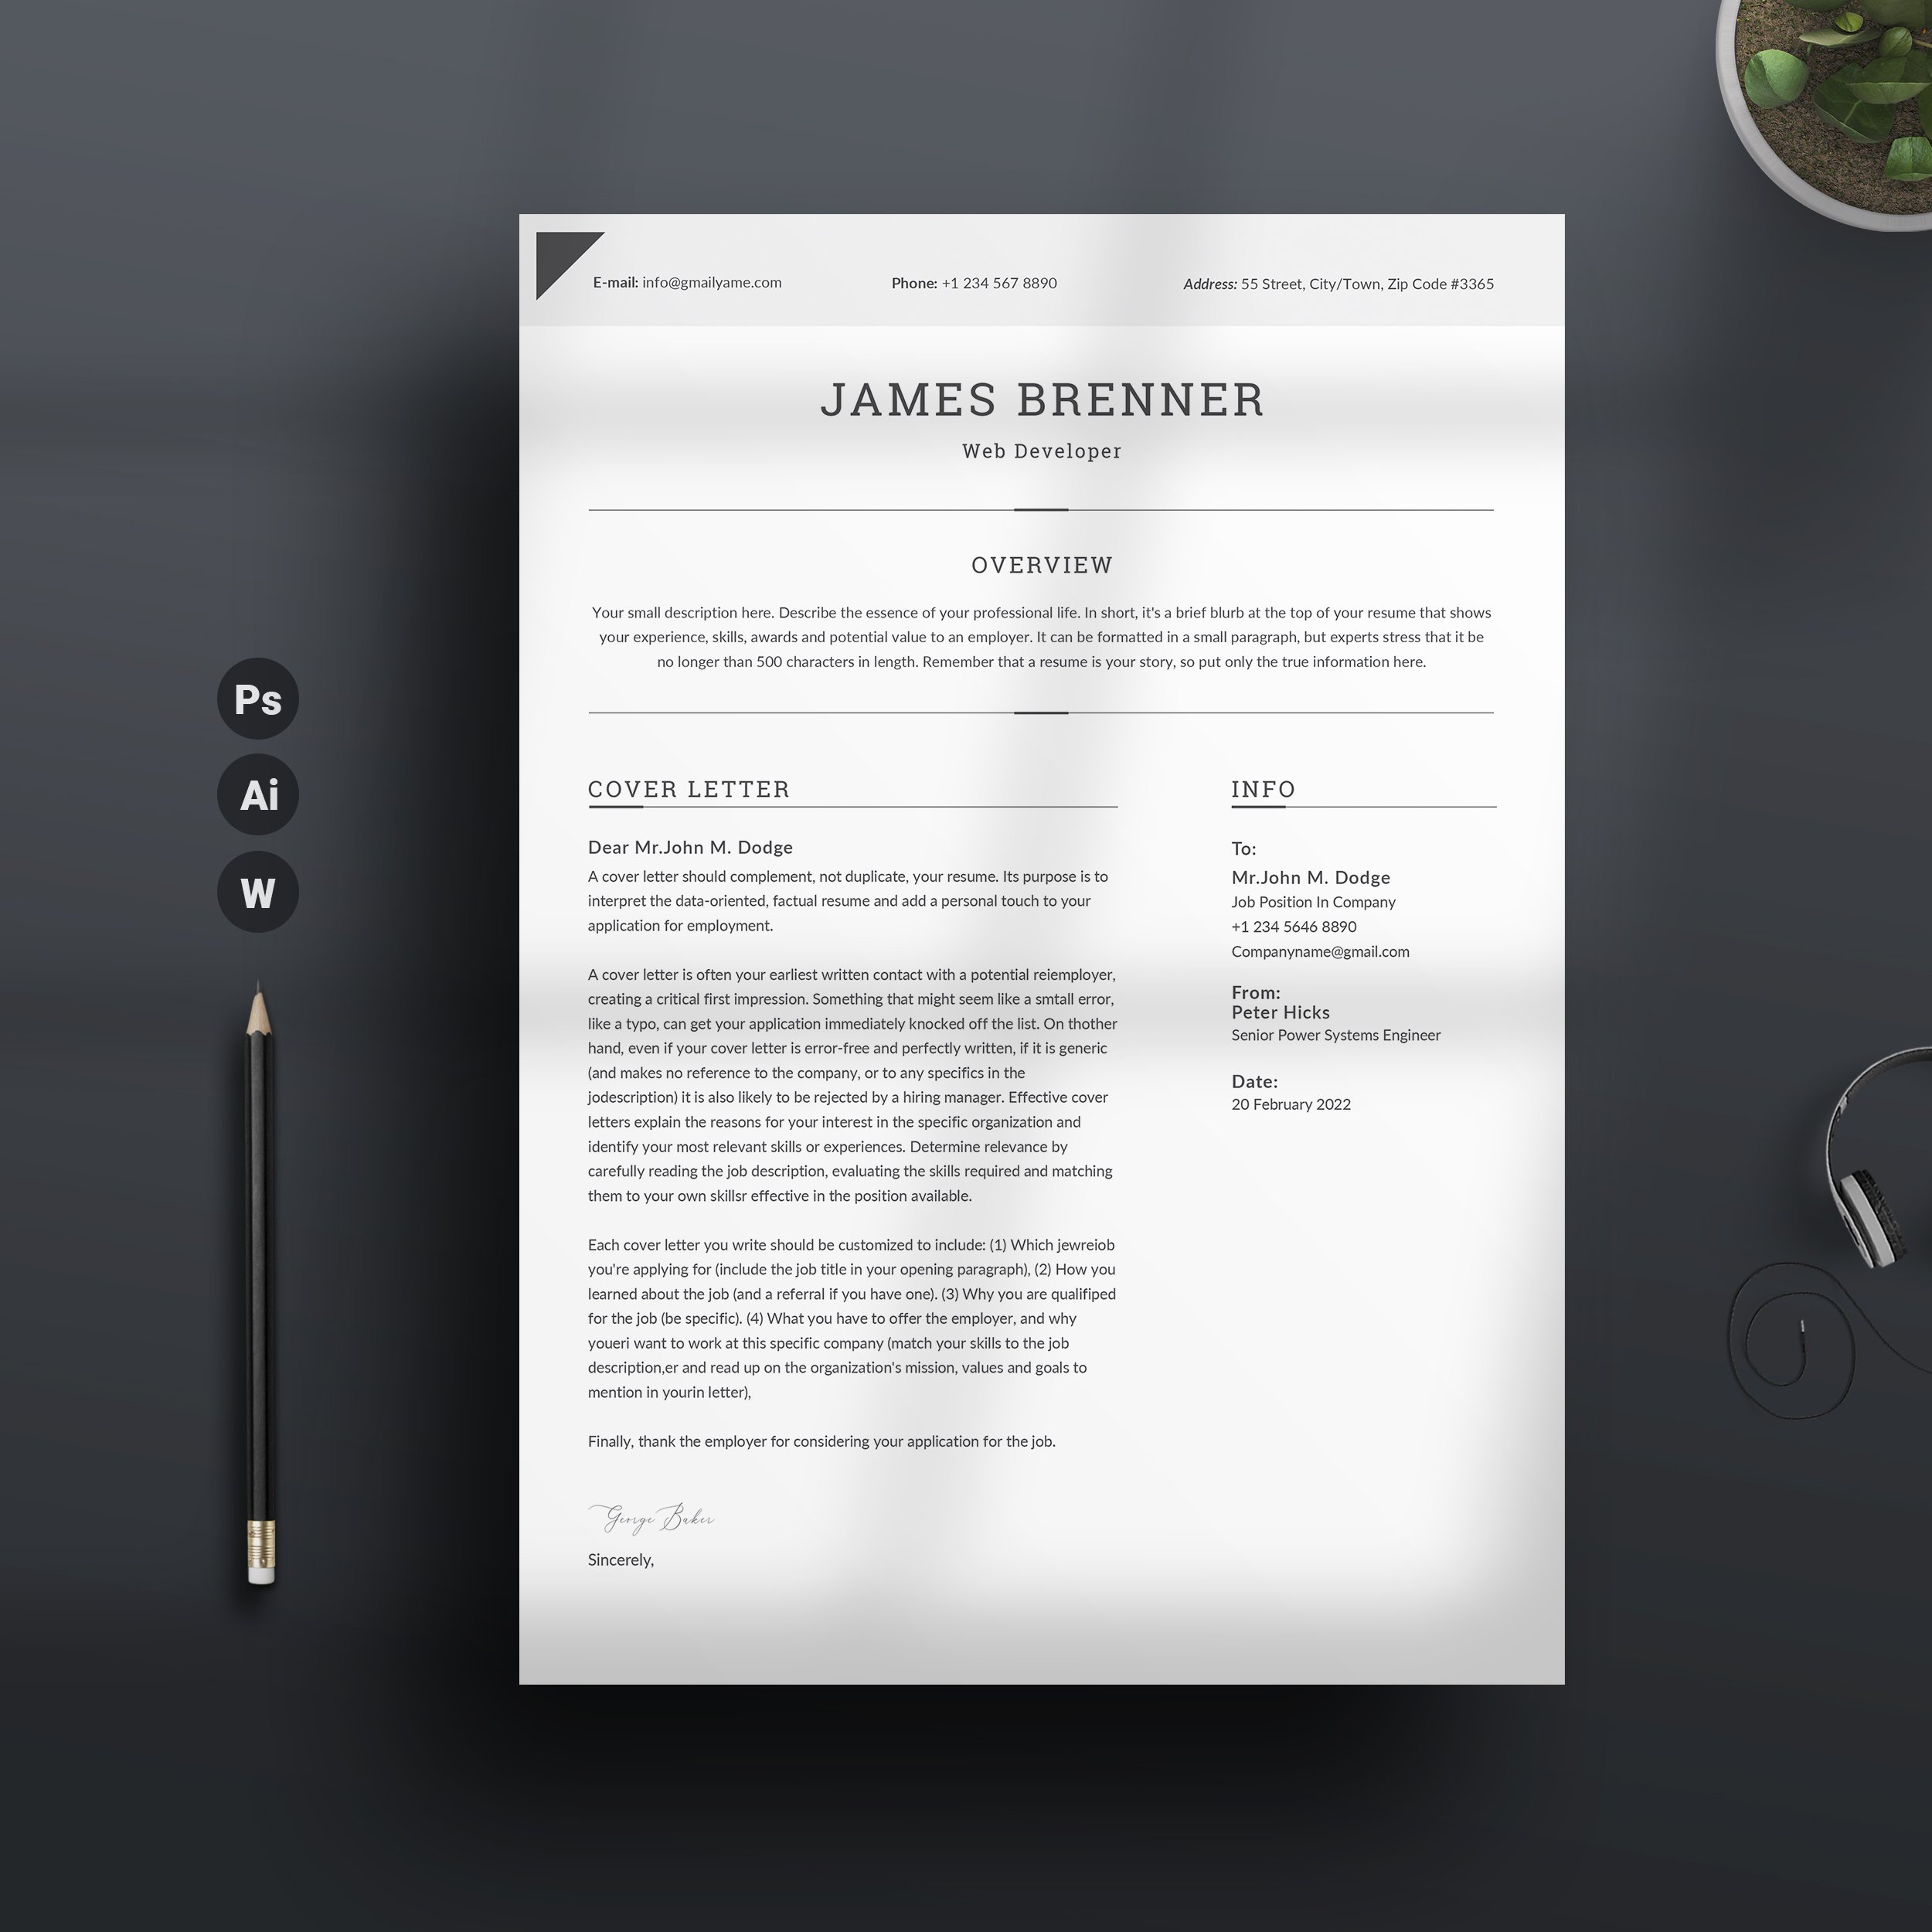 Professional resume on a desk next to a cup of coffee.